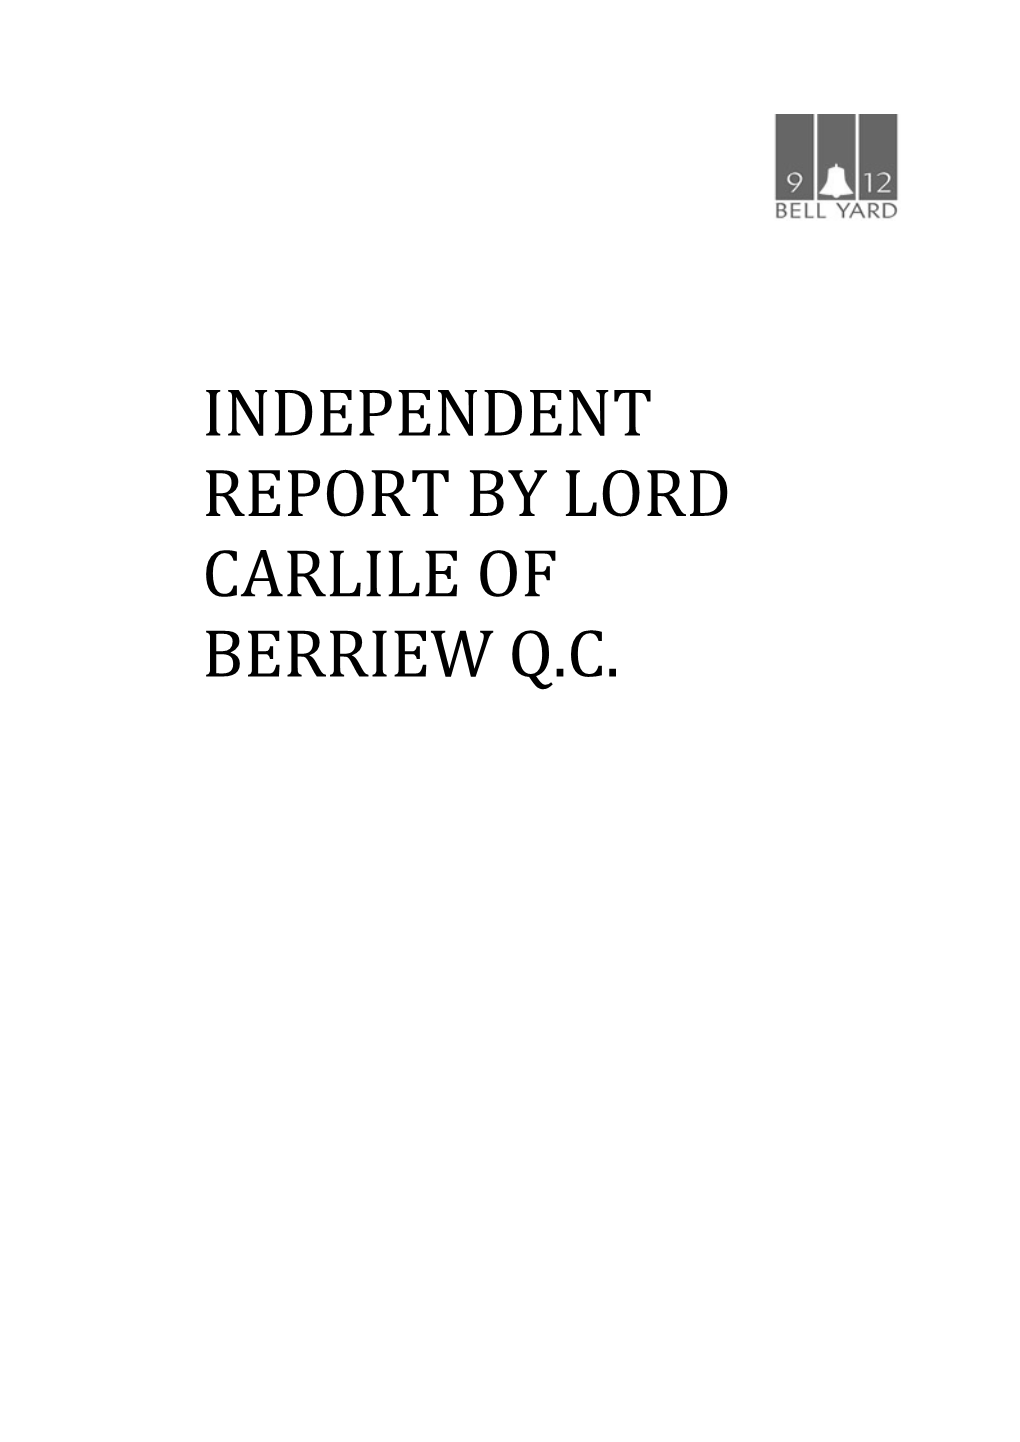 Report by Lord Carlile of Berriew Q.C. Into Matters Relating to Ealing Abbey and St Benedict’S School, Ealing